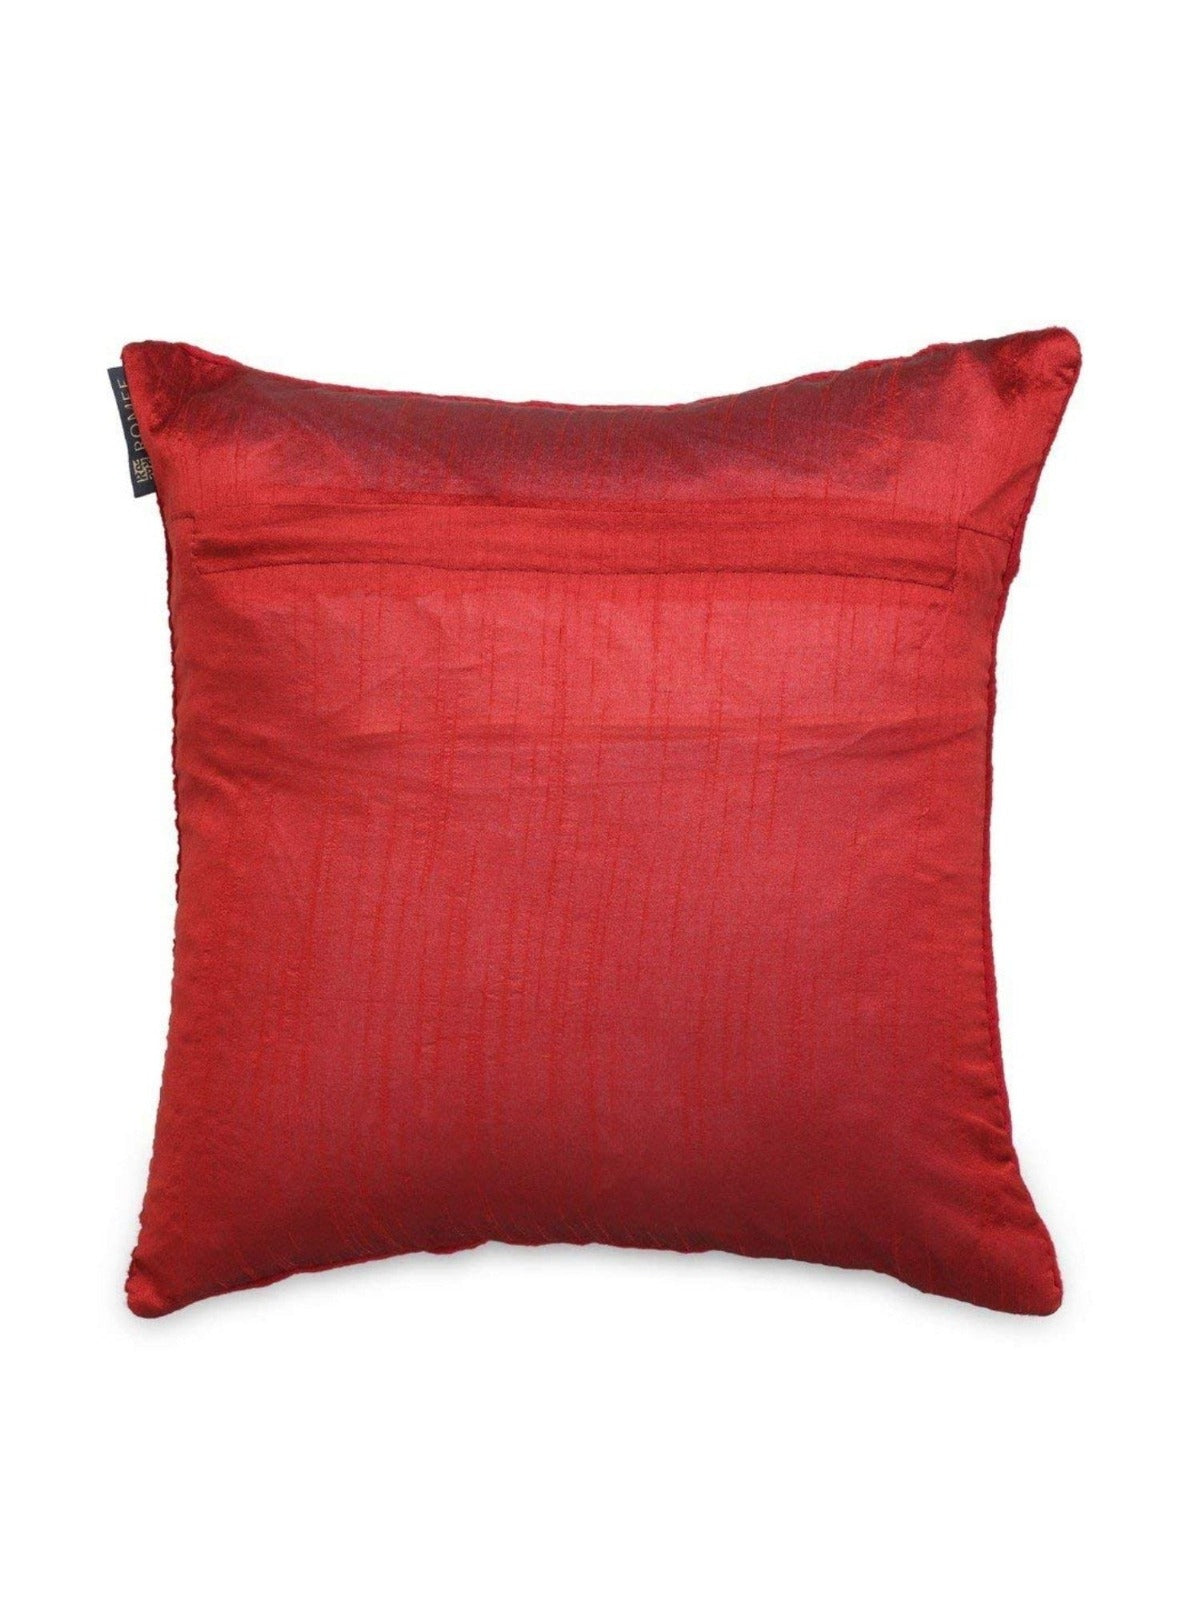 ROMEE Red Abstract Printed Cushion Covers Set of 5